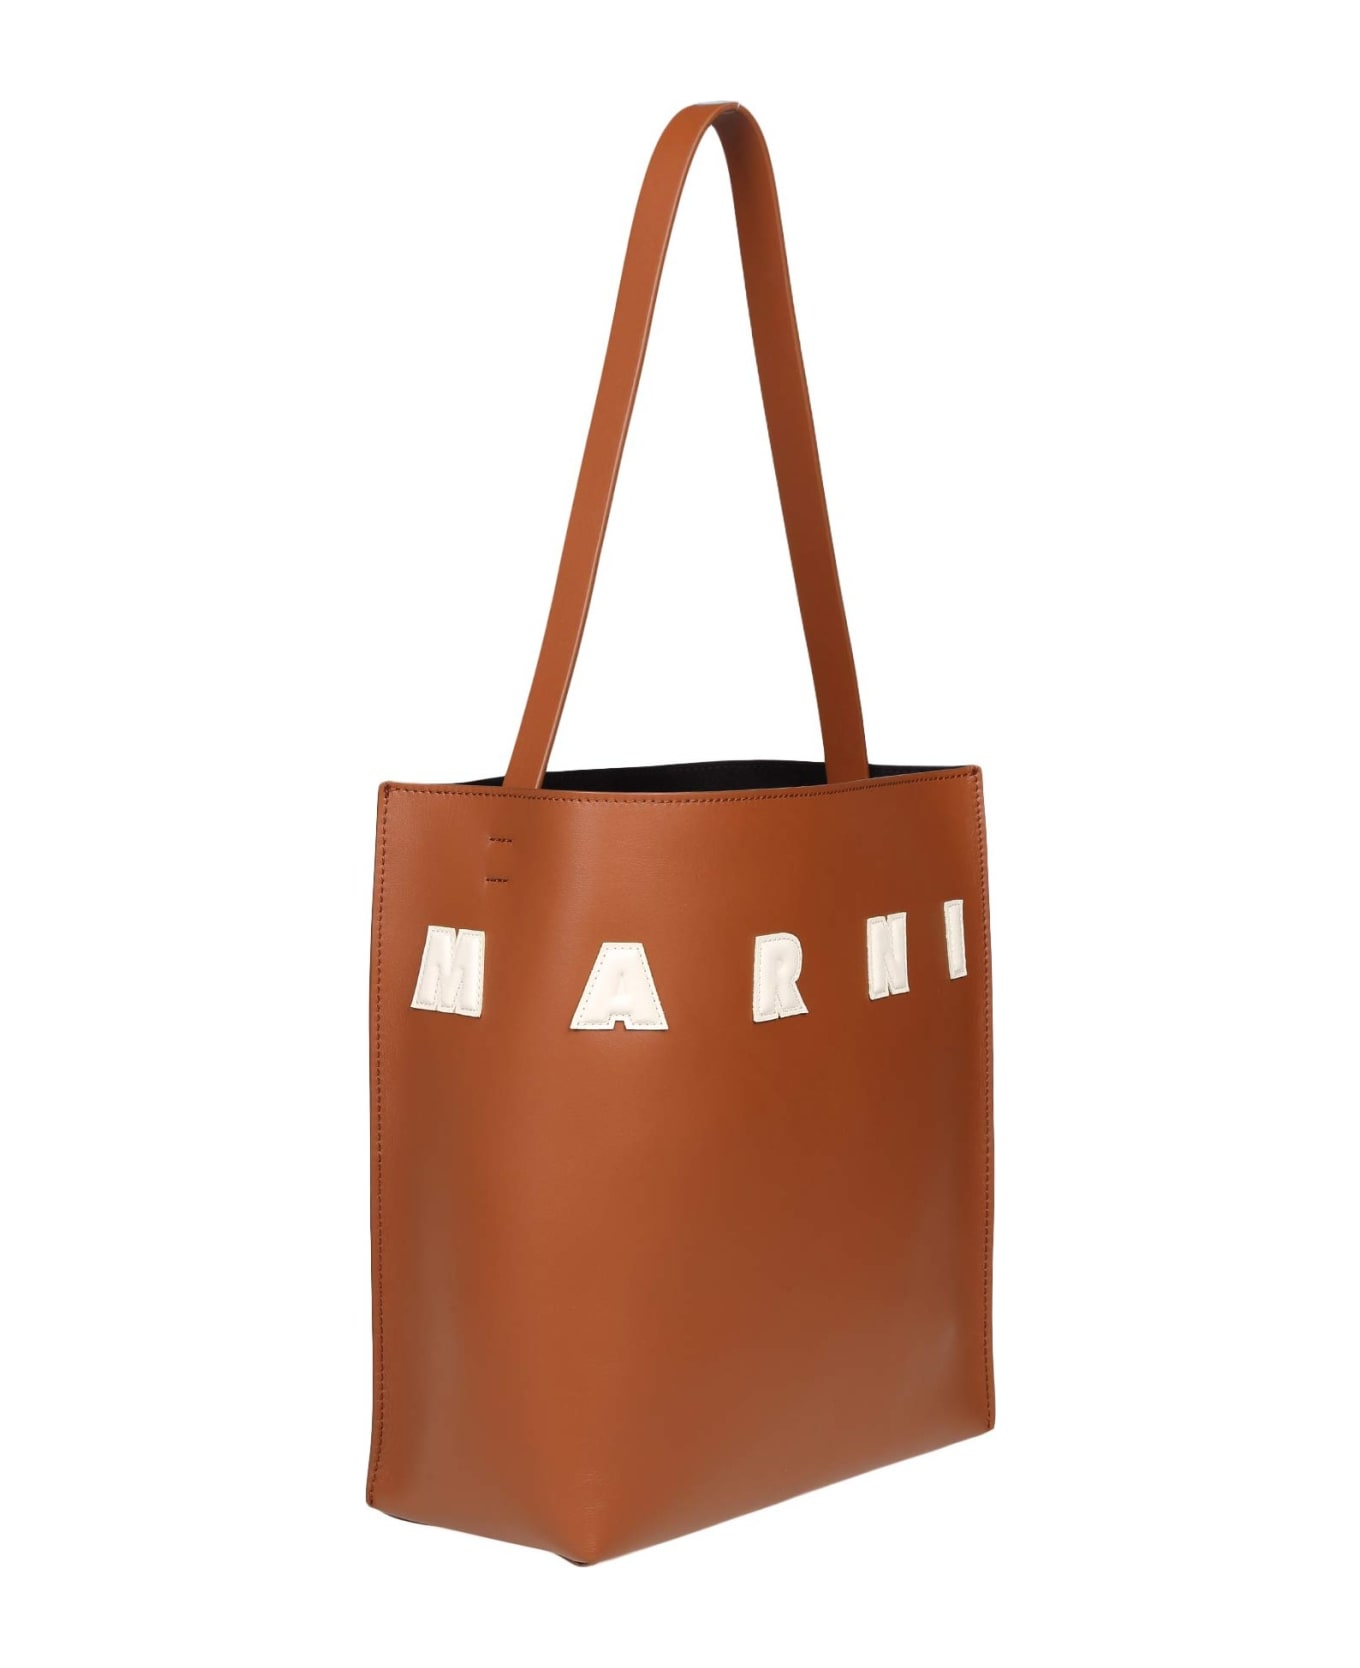 Marni Museo Hobo Bag In Tan Color Leather - Leather ショルダーバッグ